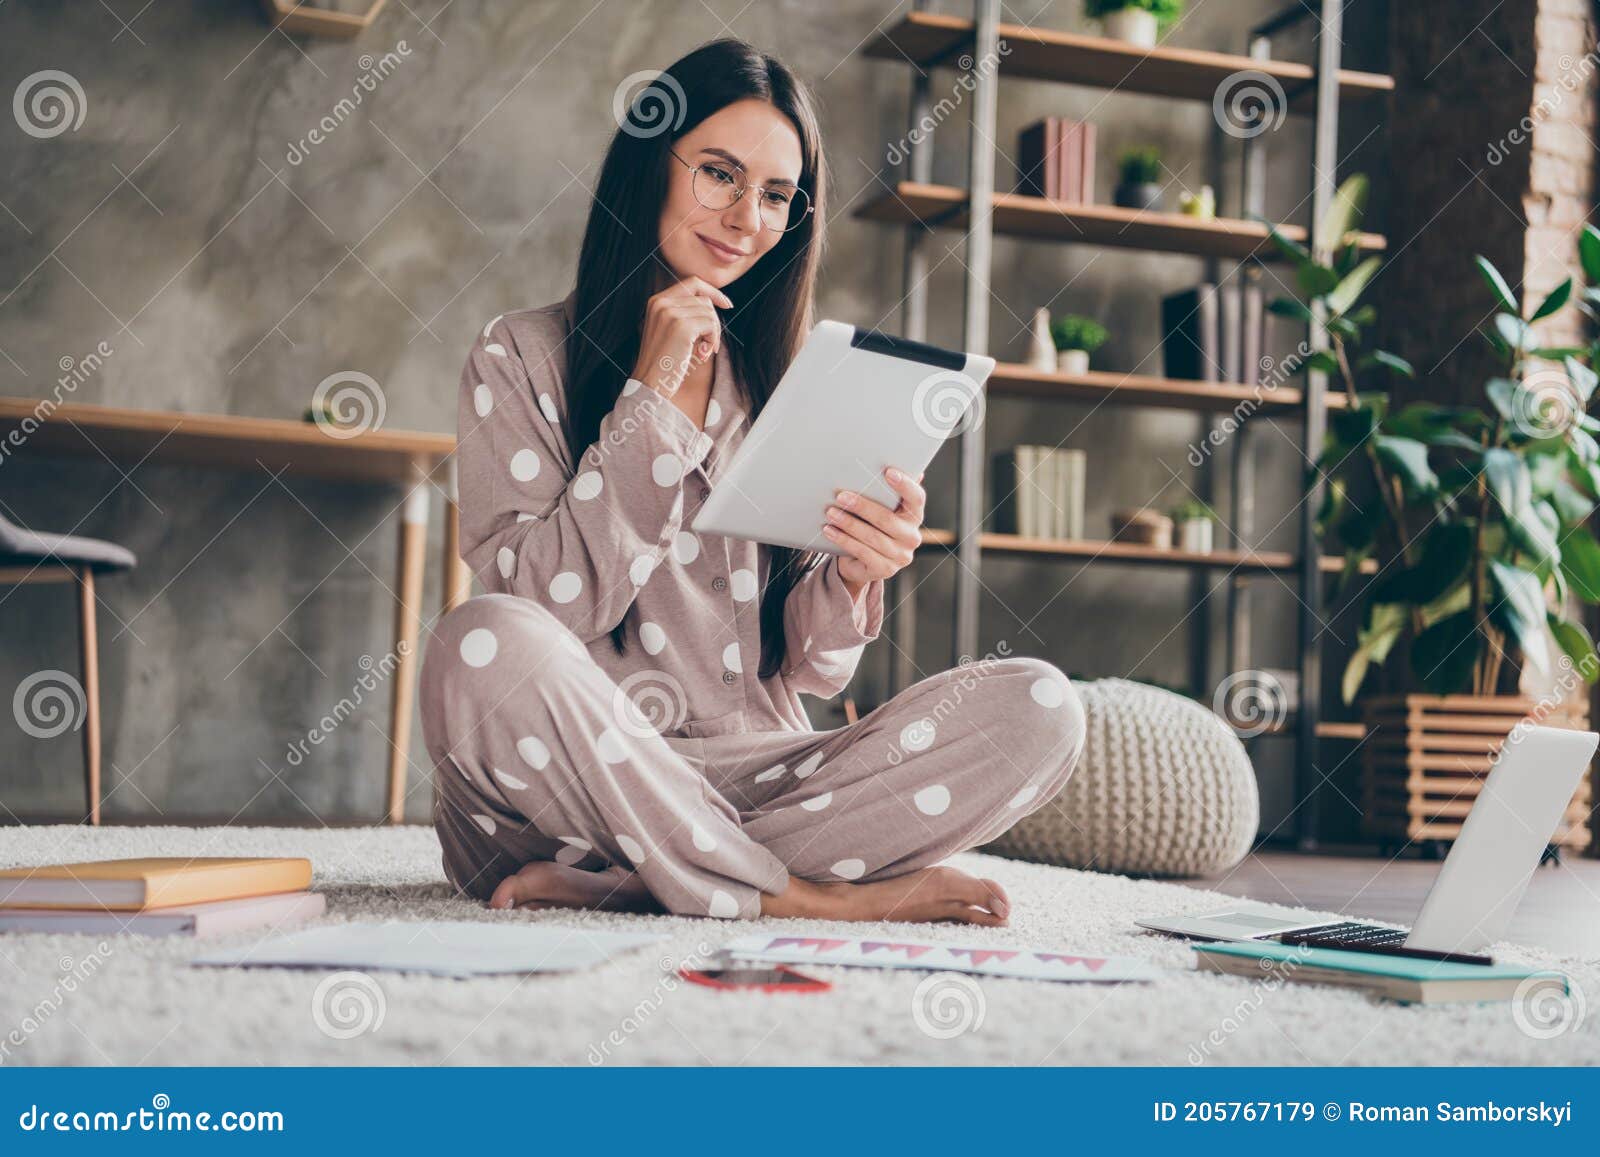 photo of nice sweet girl sit on carpet hand face type tablet wear spectacles pijama at home